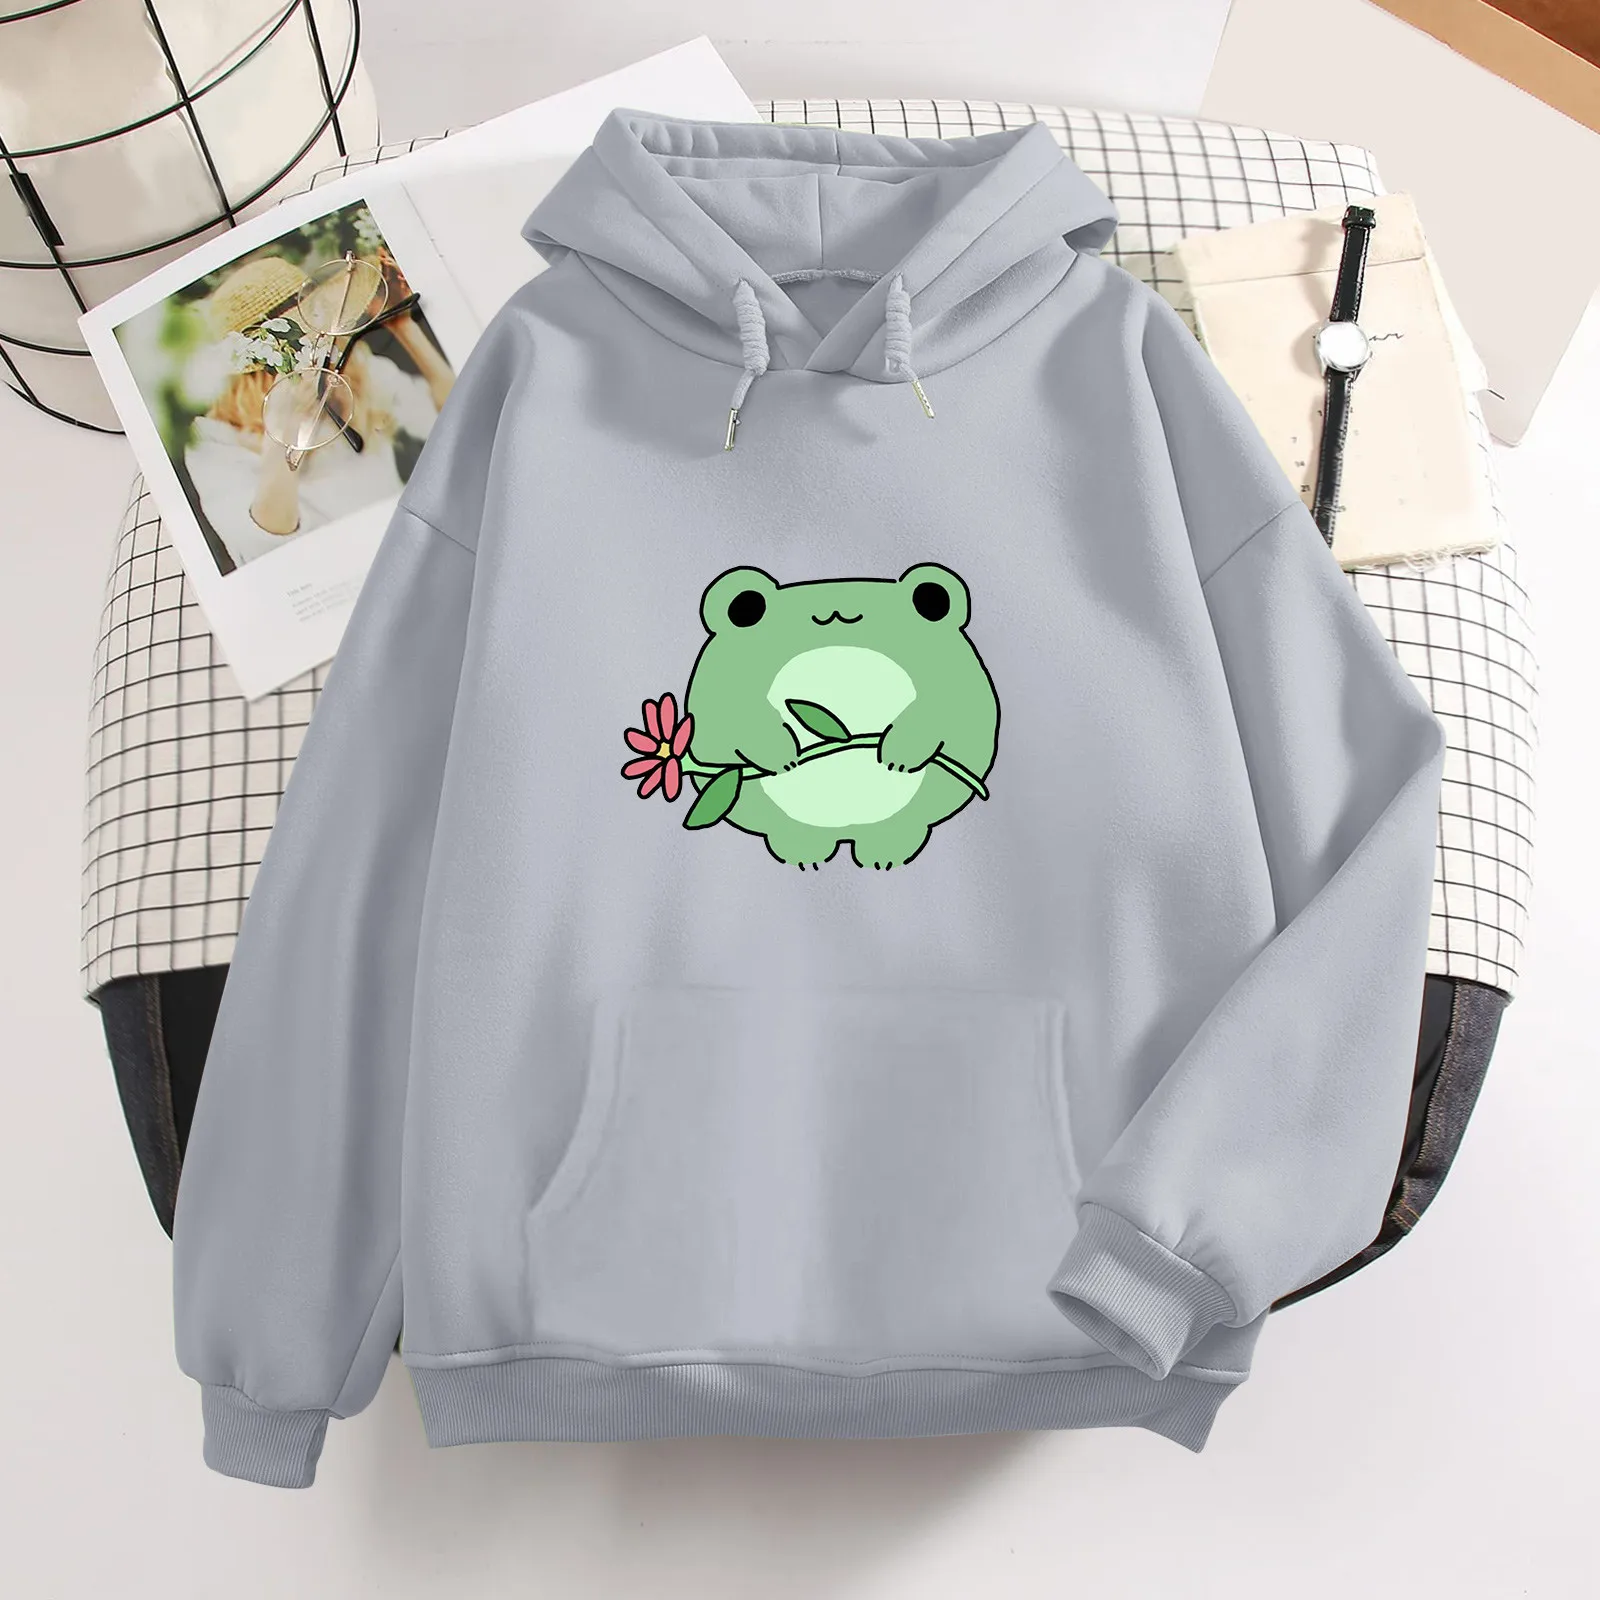 Sweatshirts for Women Long Sleeve Skateboarding Frog Los Angeles Printed  Hoodie Tops Cute Pullover Sweater Shirts for Girls (Beige, S) at   Women's Clothing store